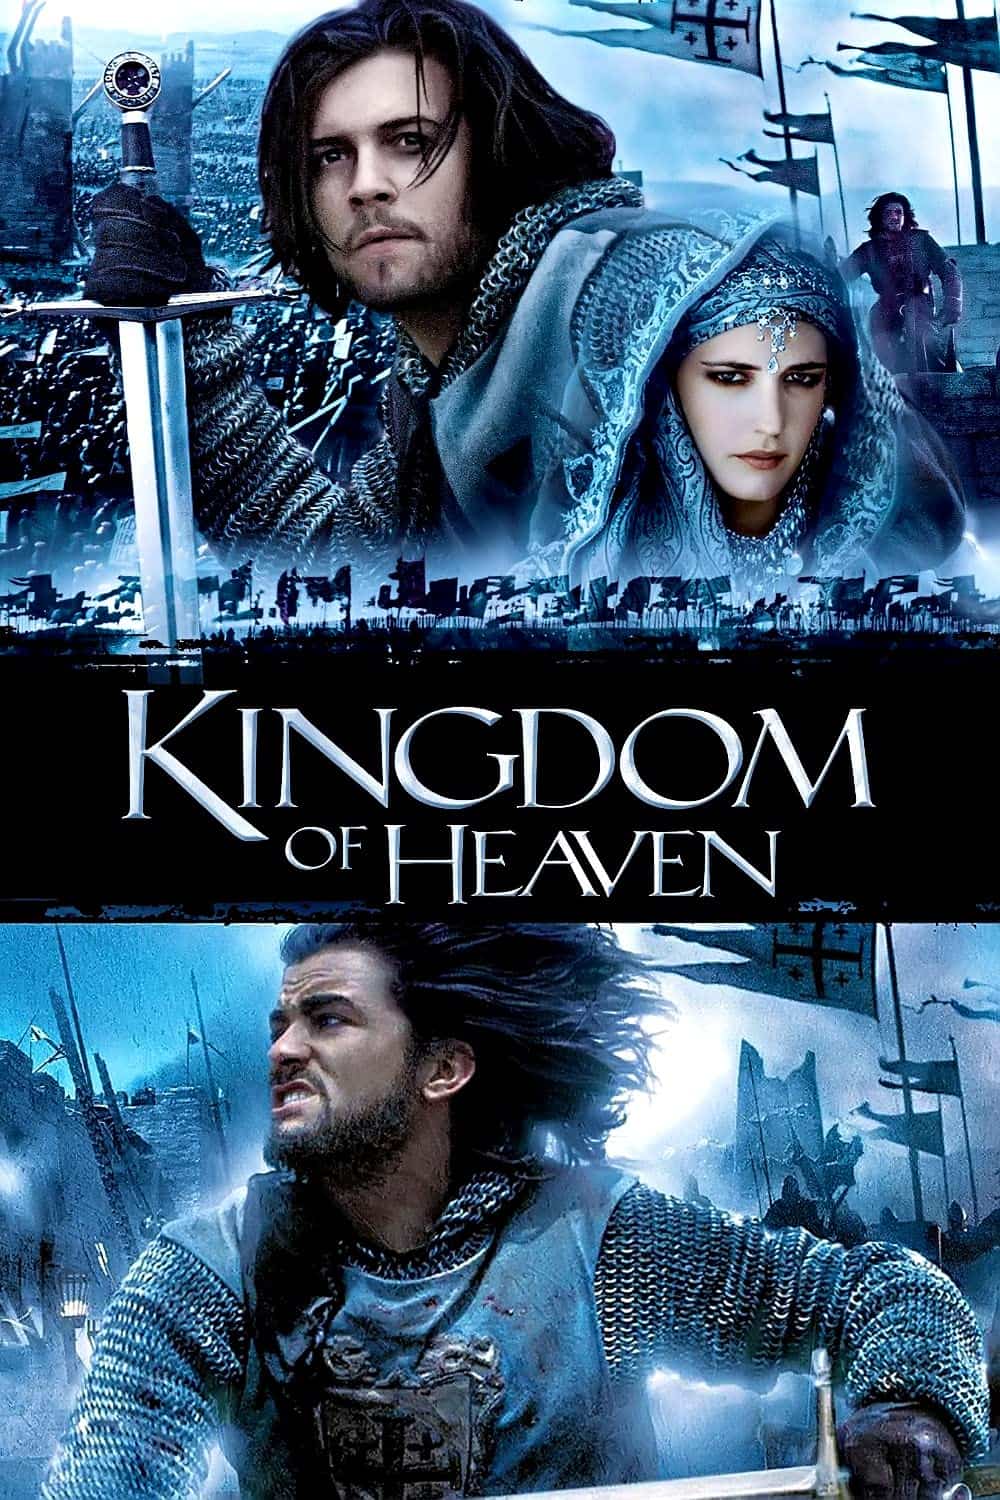 Kingdom of Heaven (2005) Best Knight Movies to Add in Your Watchlist